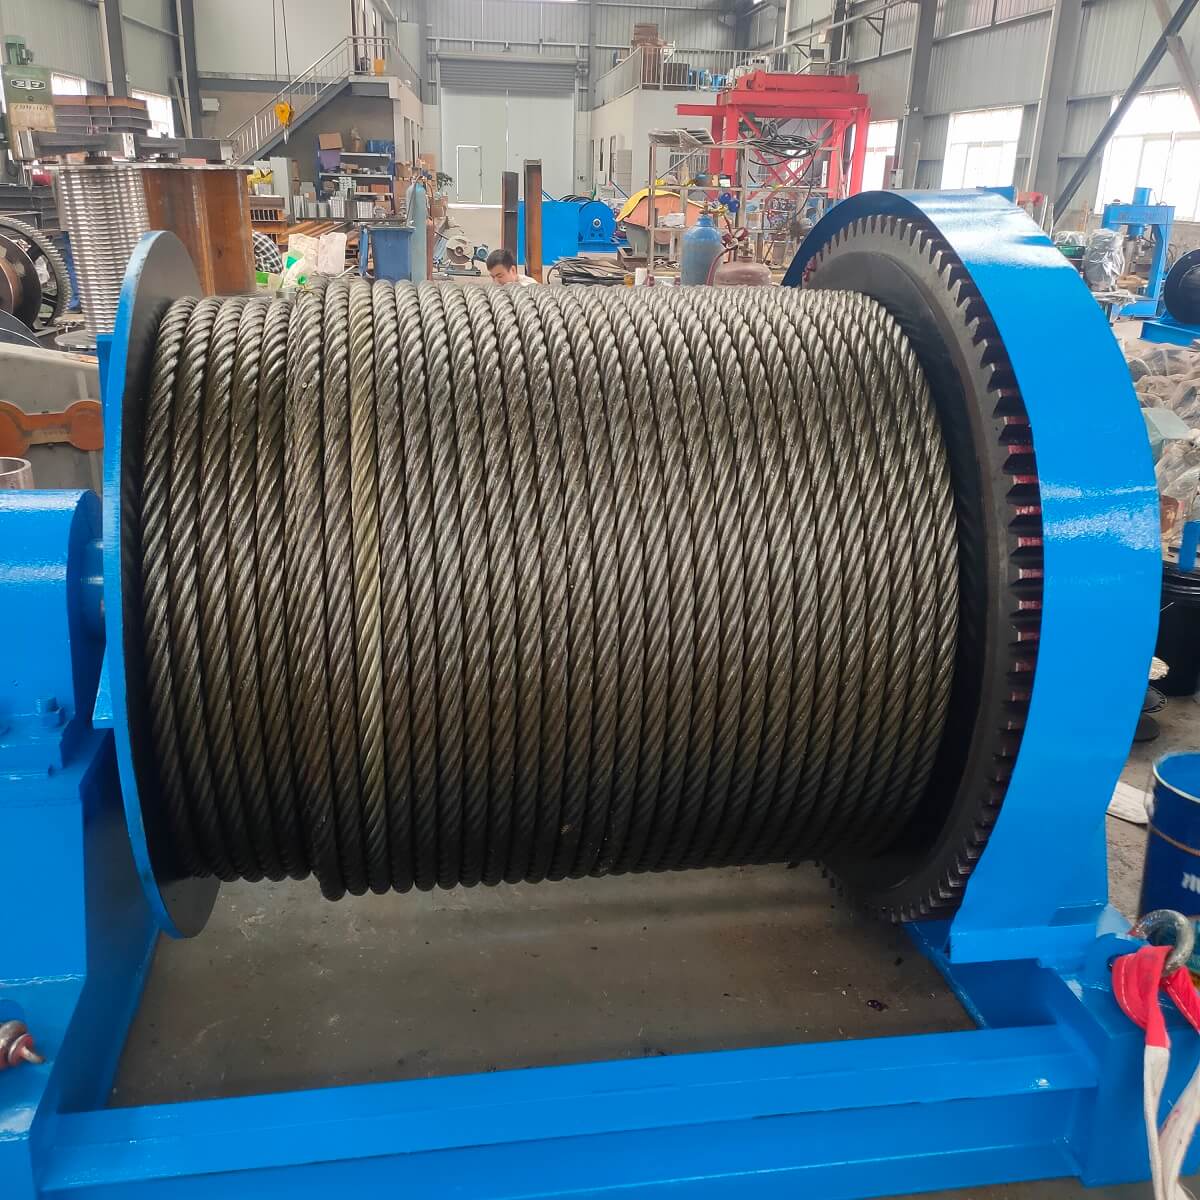 Site photos of 16 ton Building Electric Winch (Pulling cable winch)-6.jpg